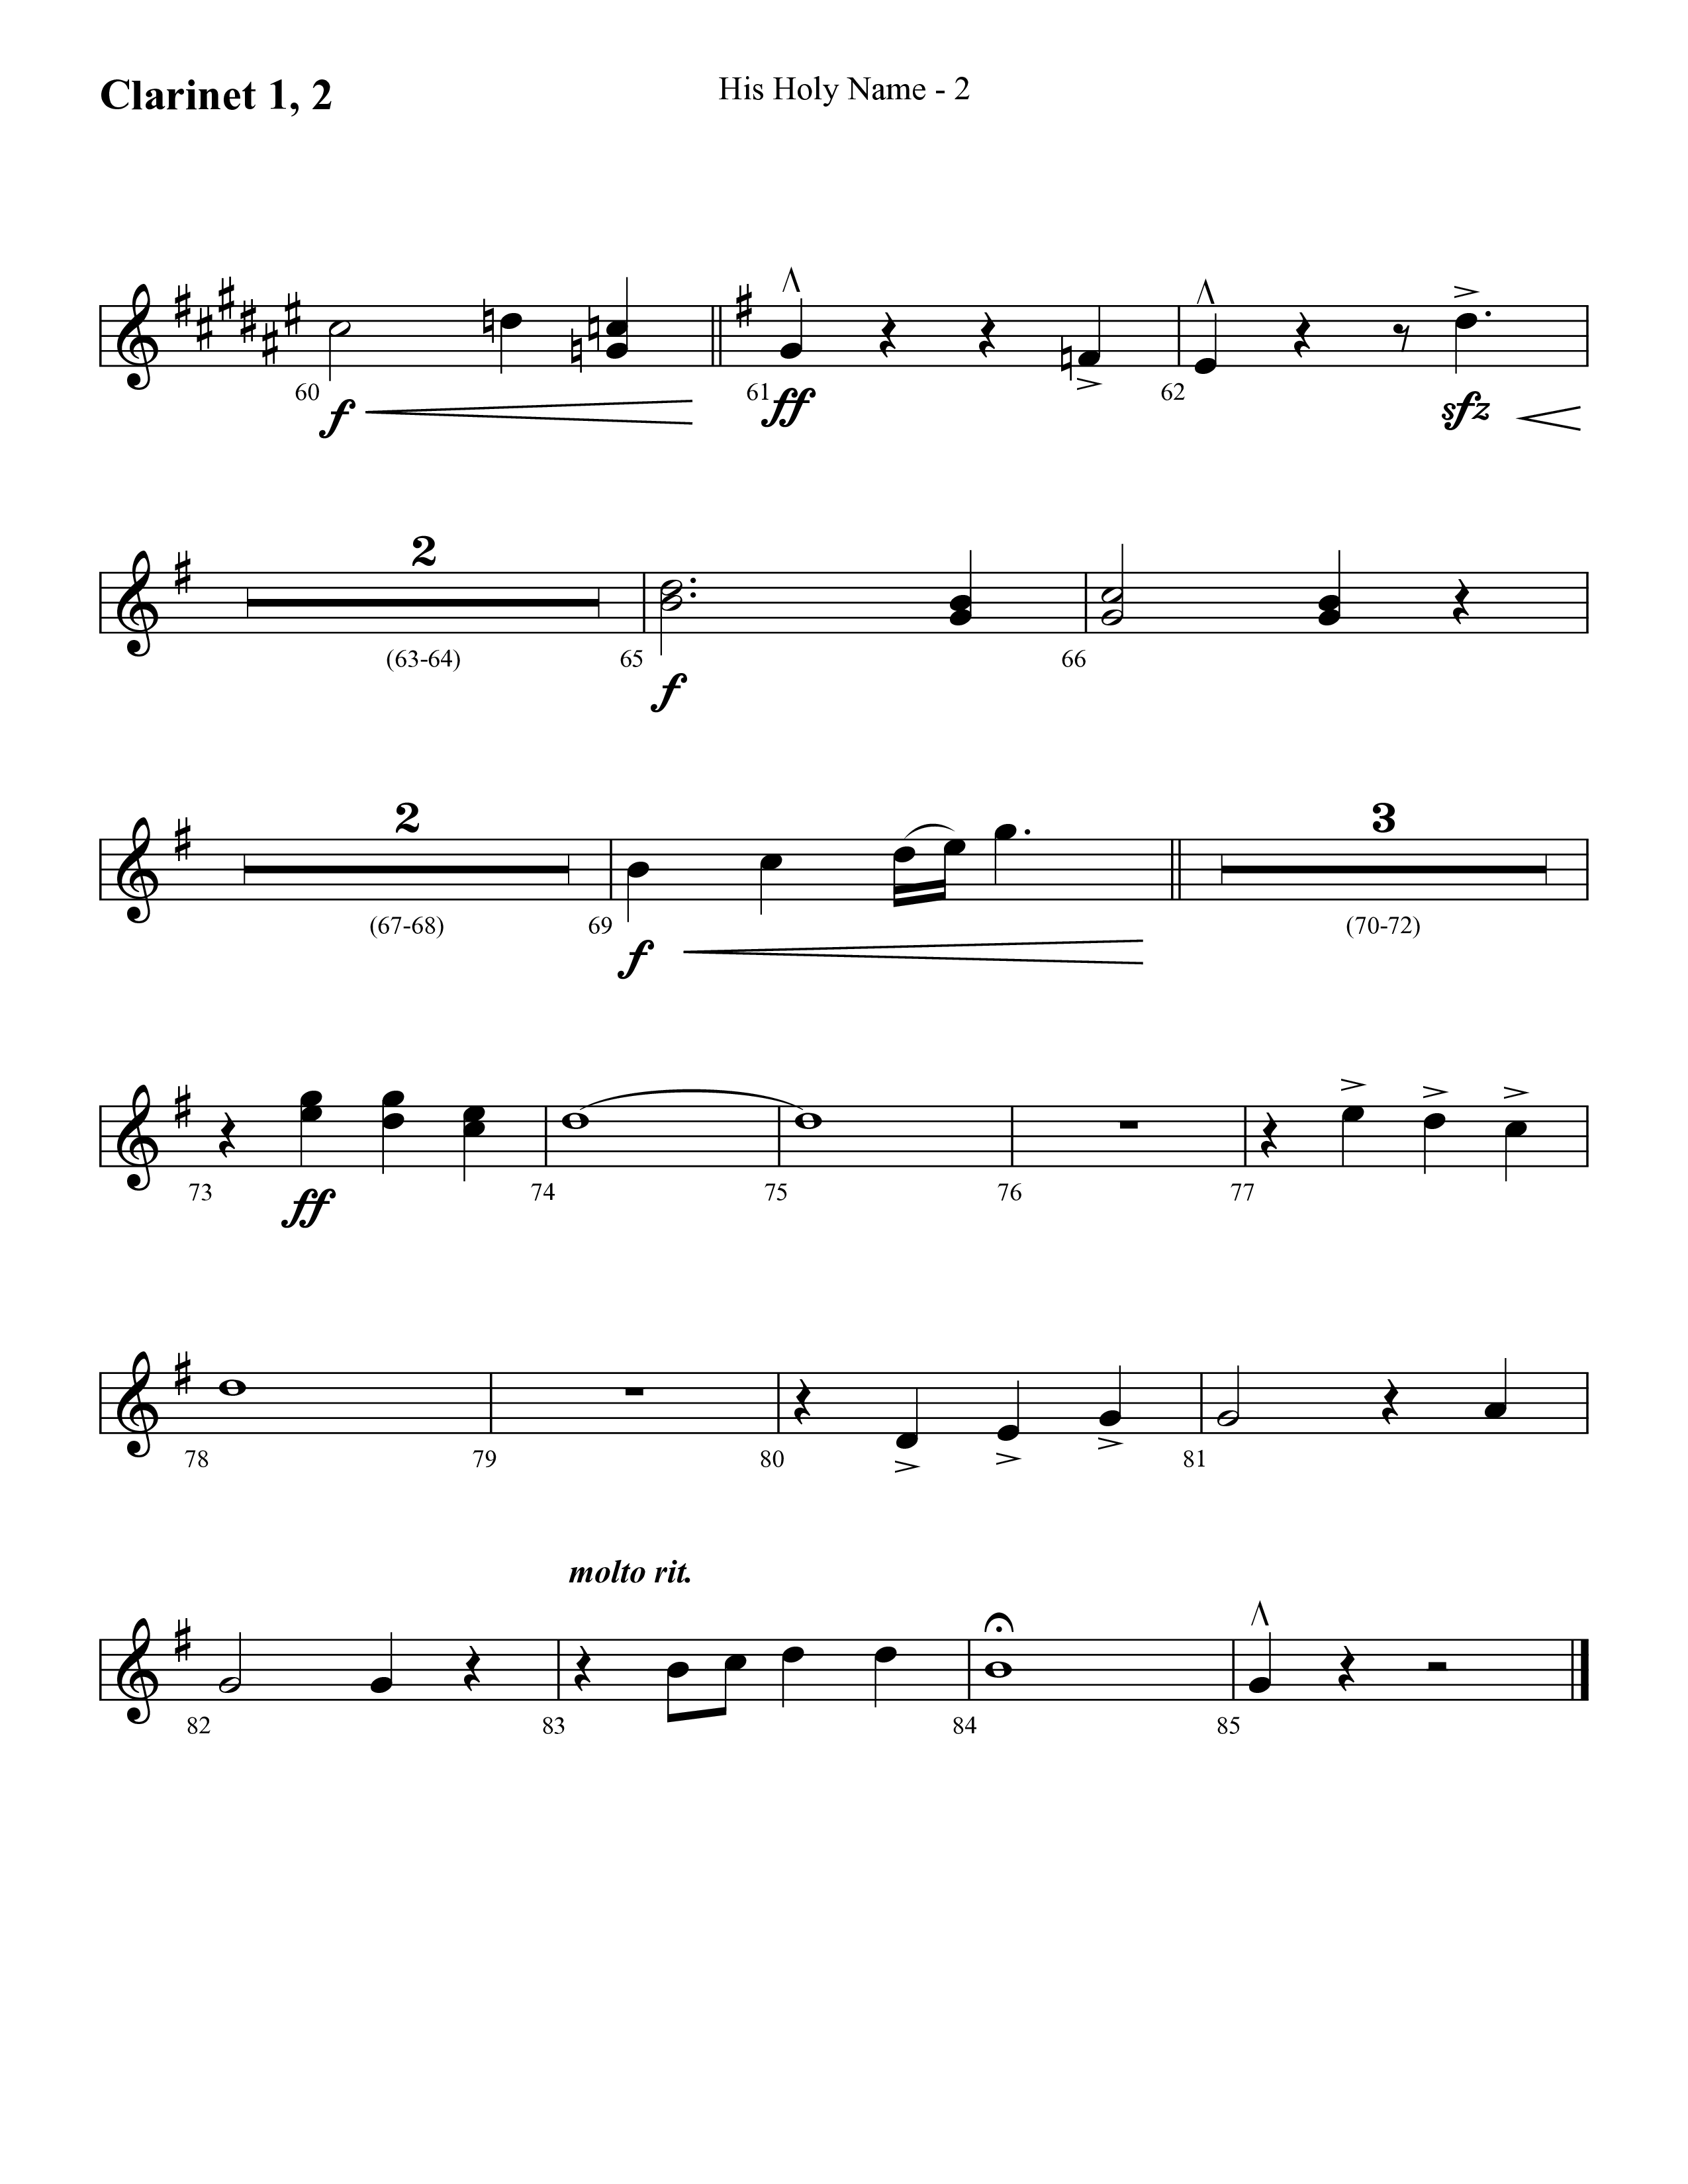 His Holy Name (with Blessed Be The Name) (Choral Anthem SATB) Clarinet 1/2 (Lifeway Choral / Arr. Cliff Duren)